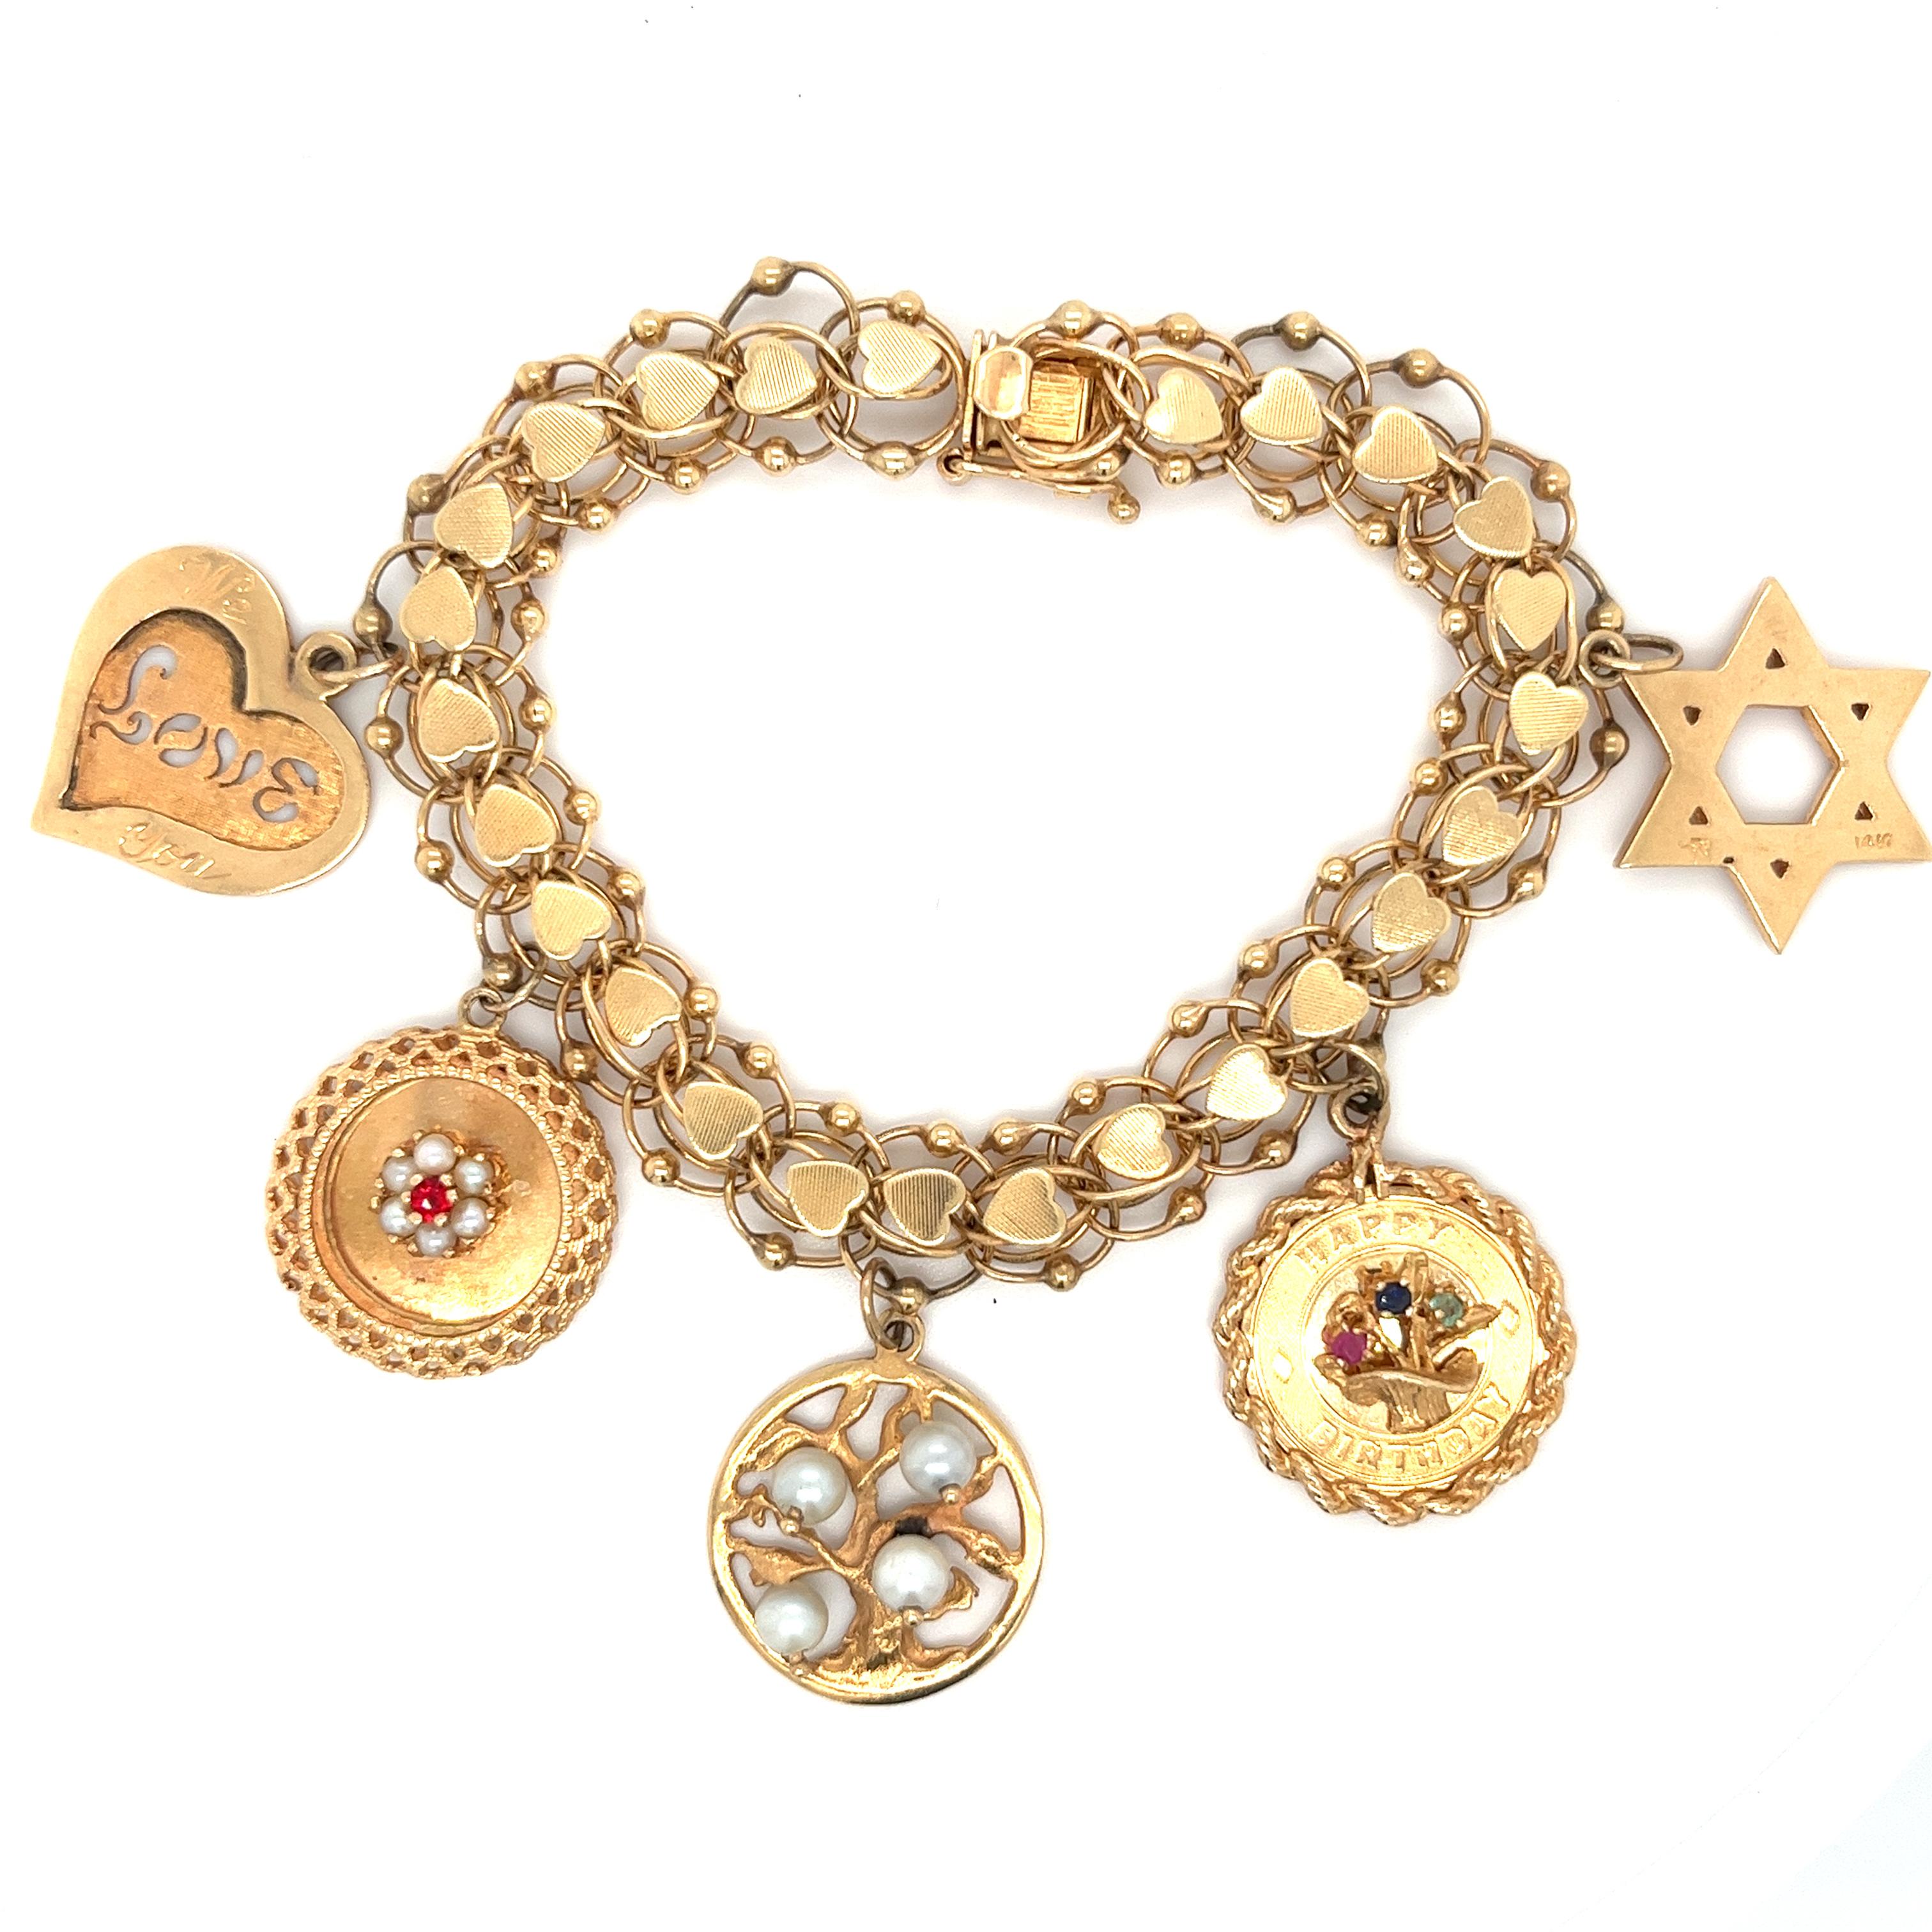 Introducing this extremely detailed 14k gold charm bracelet. Each link has two cable links interlocked together to the preceding link and is topped with a gold heart. A truly beautiful vintage estate piece made to tell that special someone how much